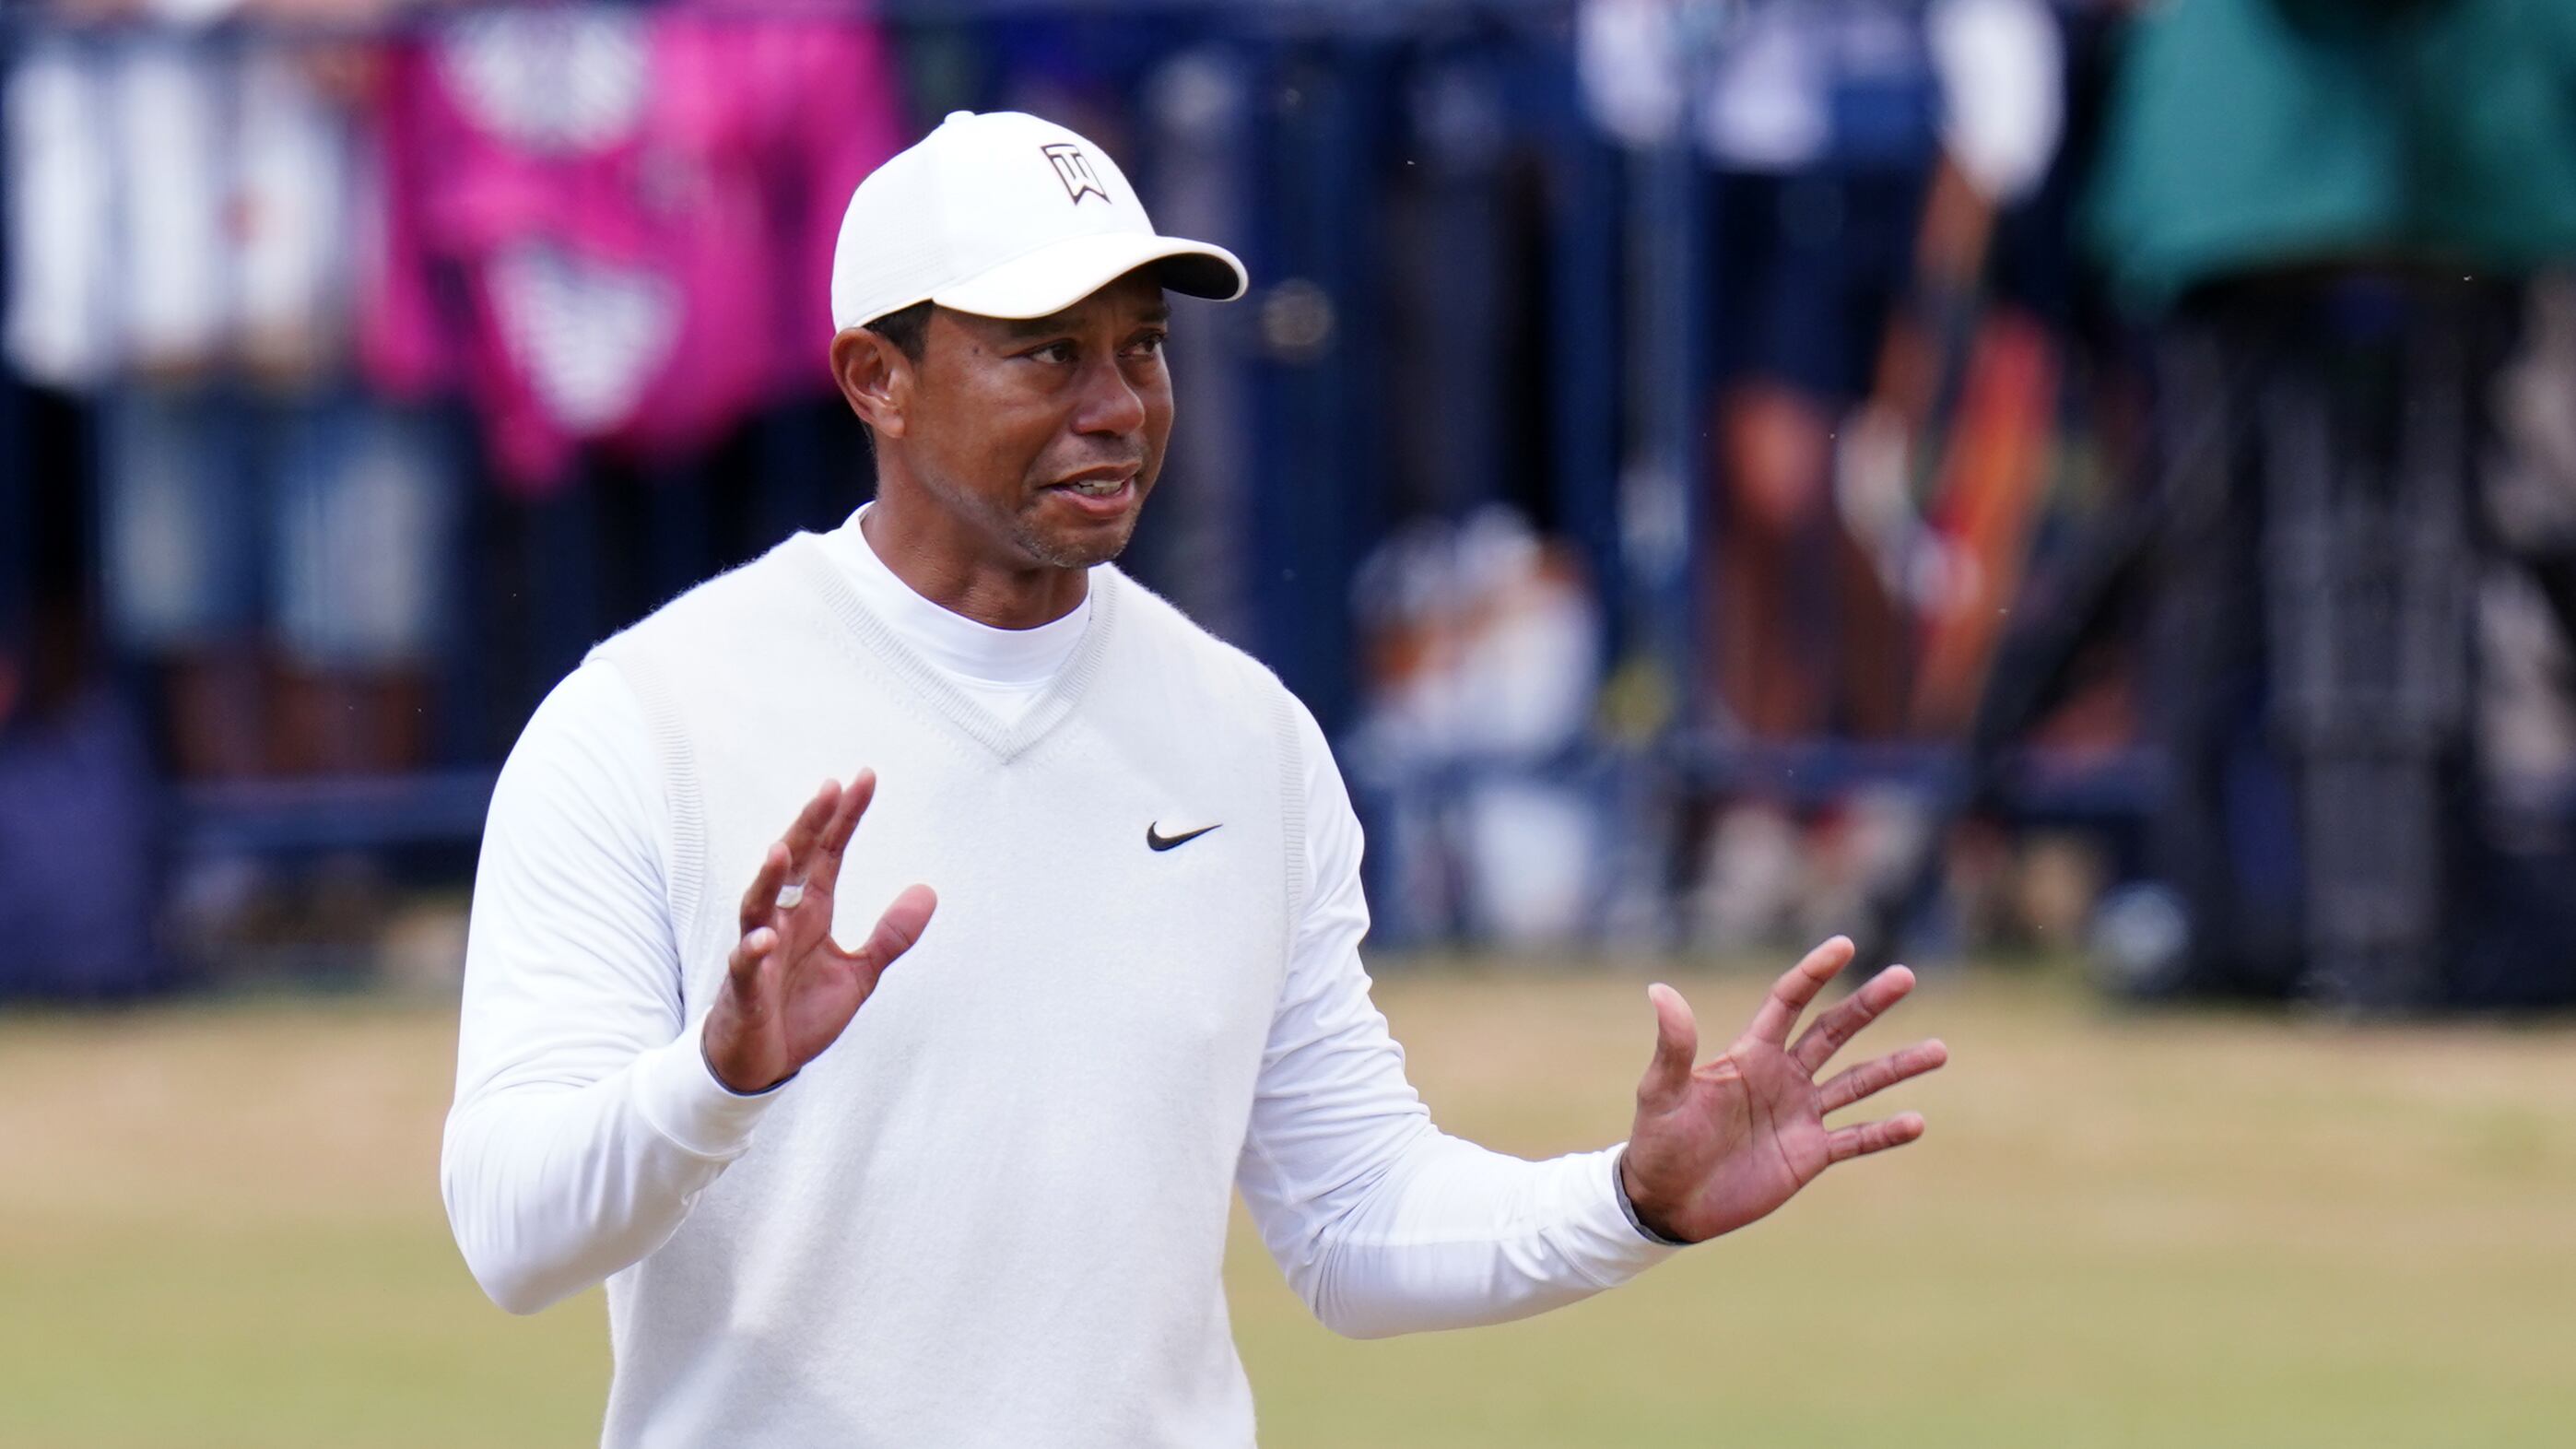 Tiger Woods has been granted a lifetime exemption to eight of the PGA Tour’s most lucrative events